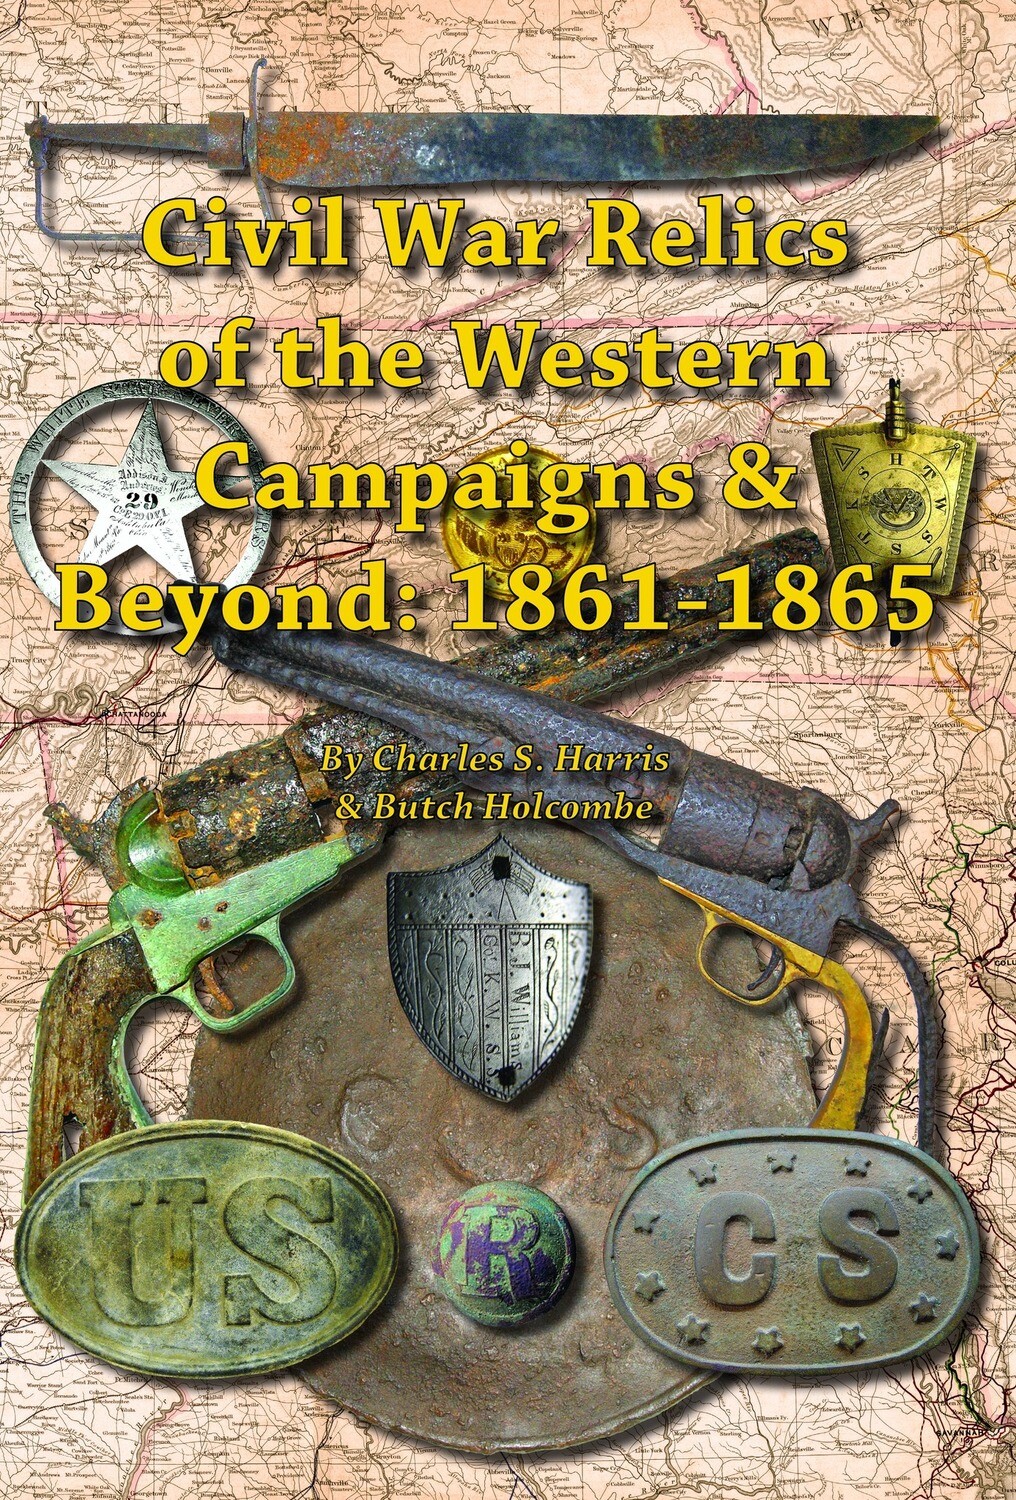 Civil War Relics of the Western Campaigns & Beyond 1861-1865